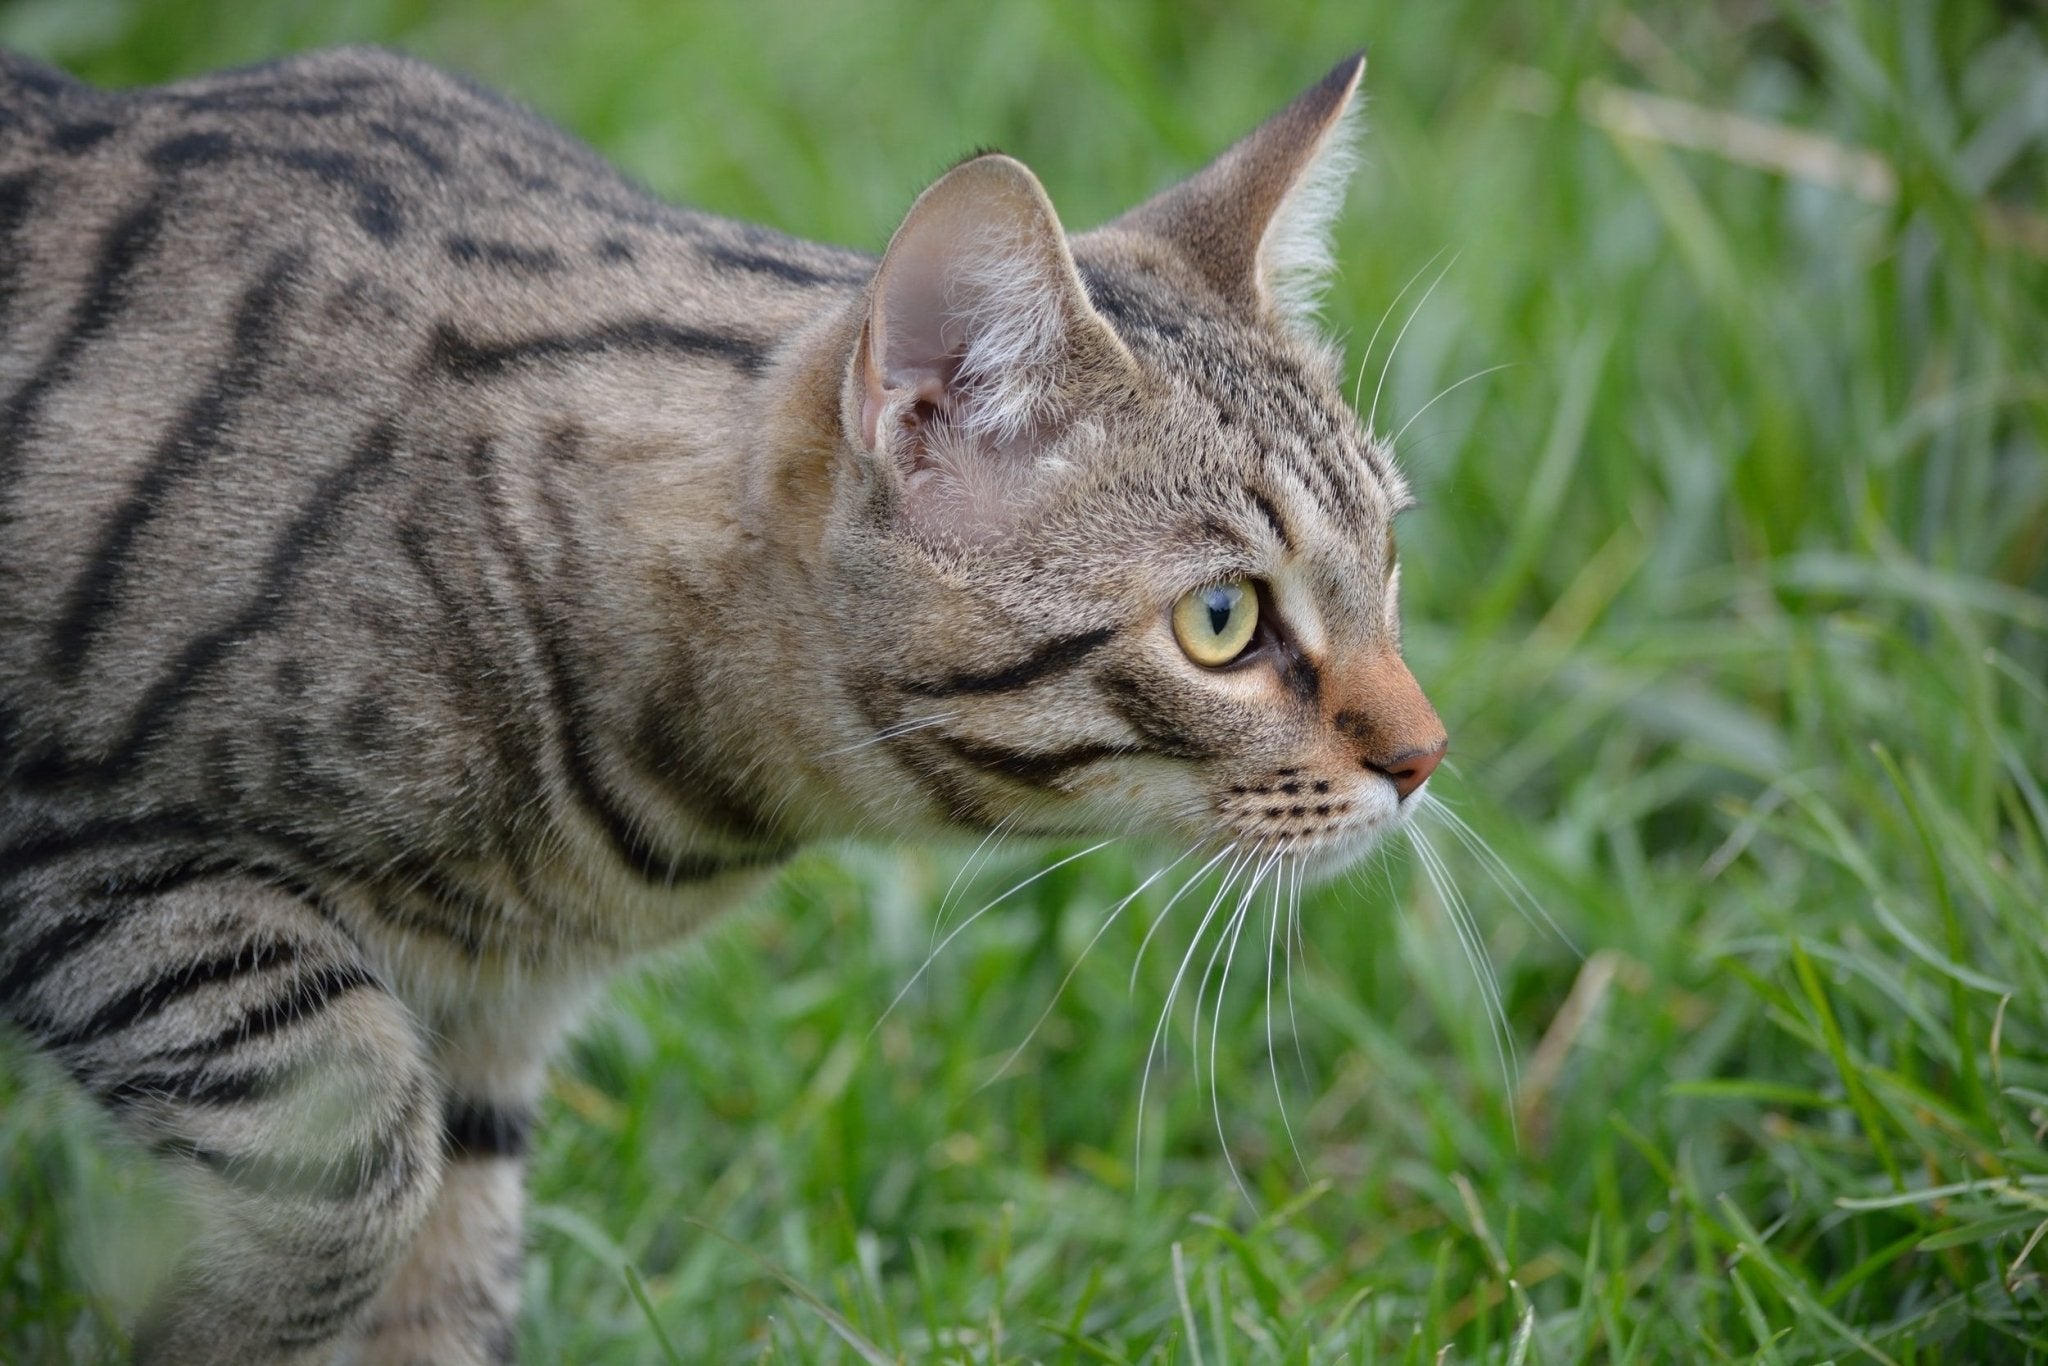 Is Your Pet Affecting Wildlife Populations? - Pet Impact